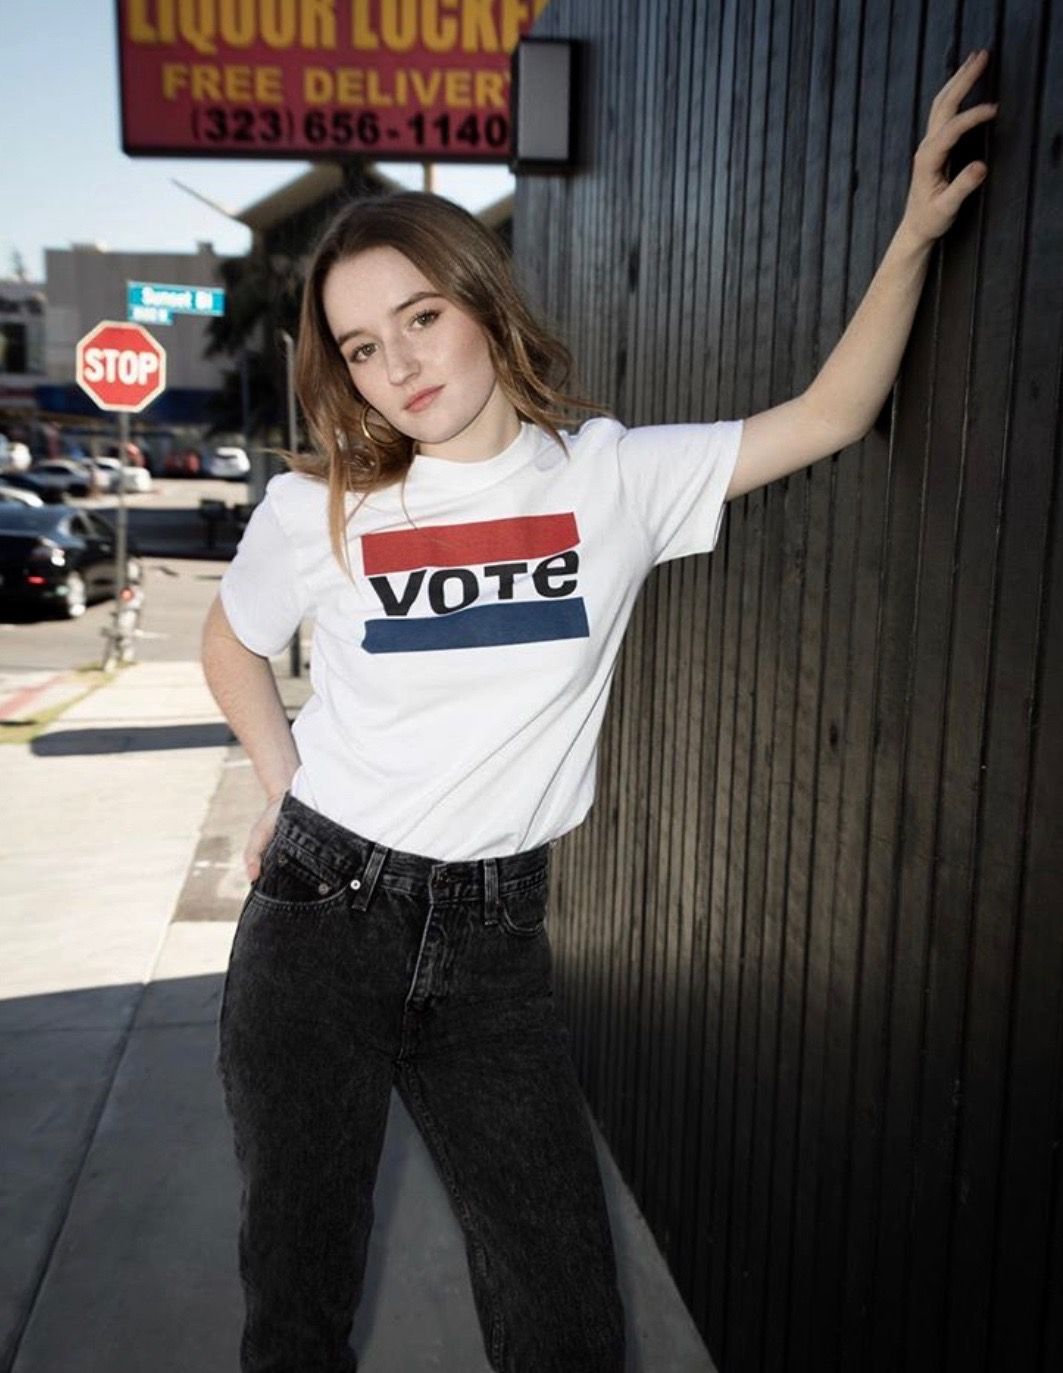 craig ormond recommends kaitlyn dever in a bikini pic